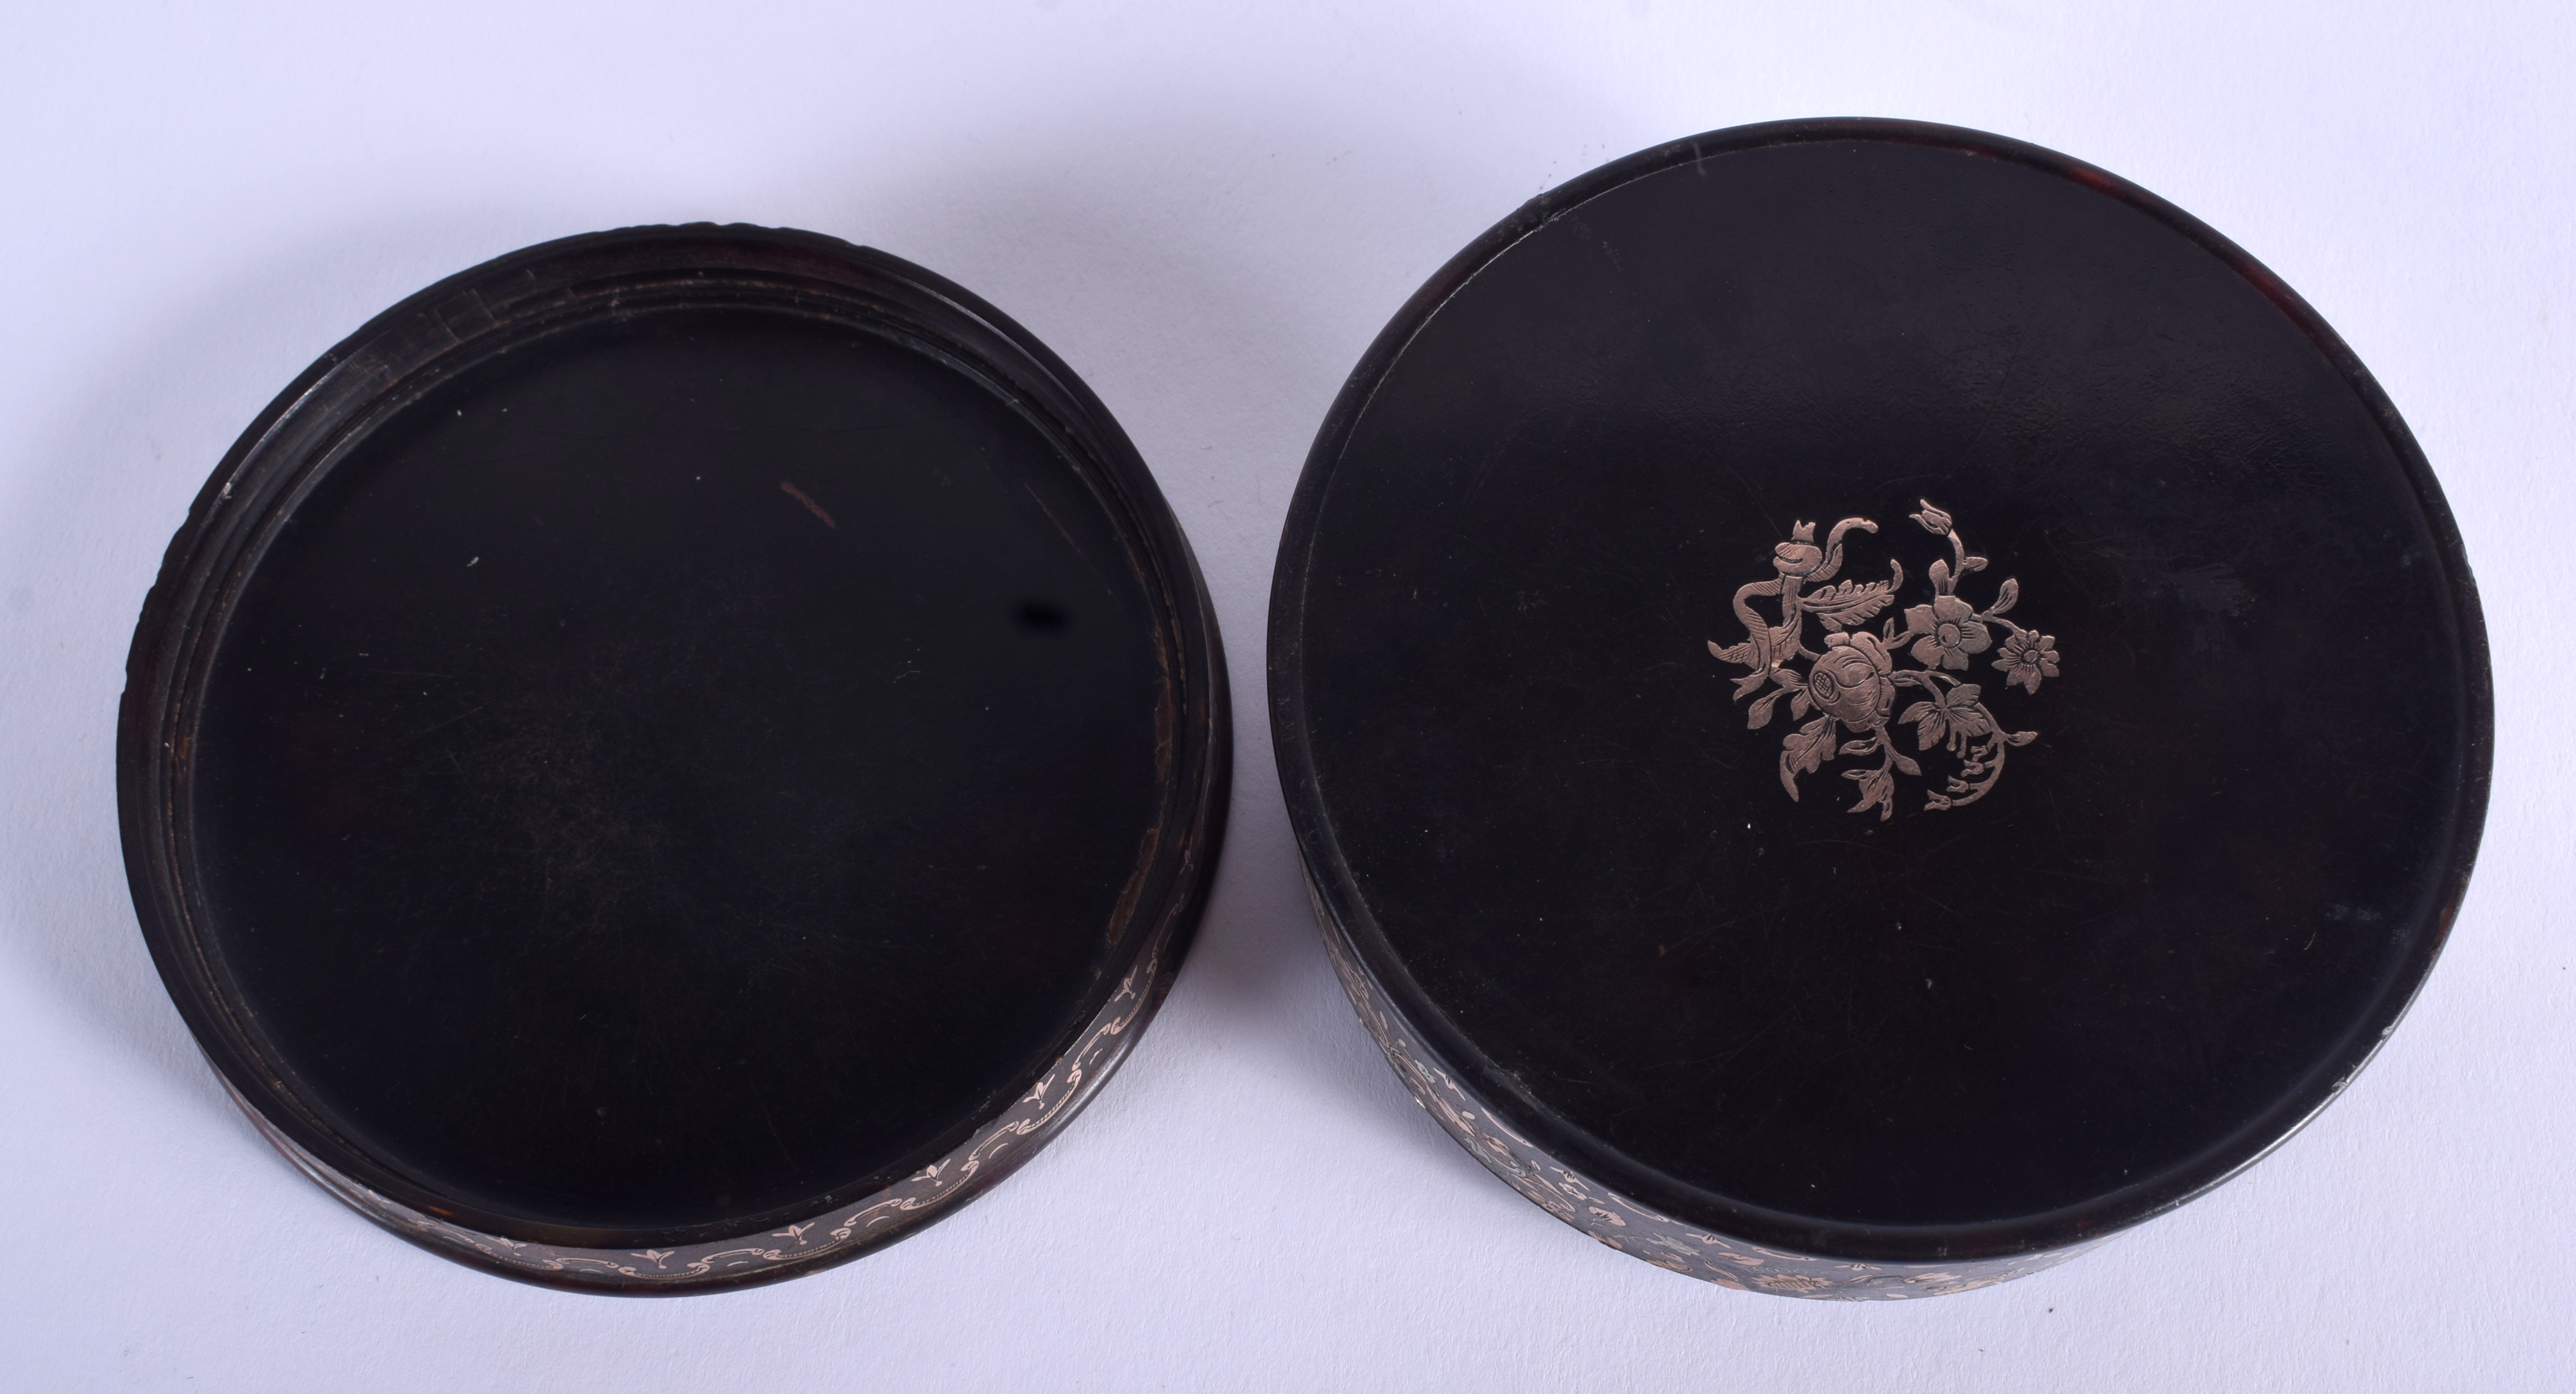 A GOOD GEORGEIII GOLD INLAID PIQUE WORK TORTOISESHELL BOX AND COVER decorated with foliage. 9 cm x - Image 5 of 5